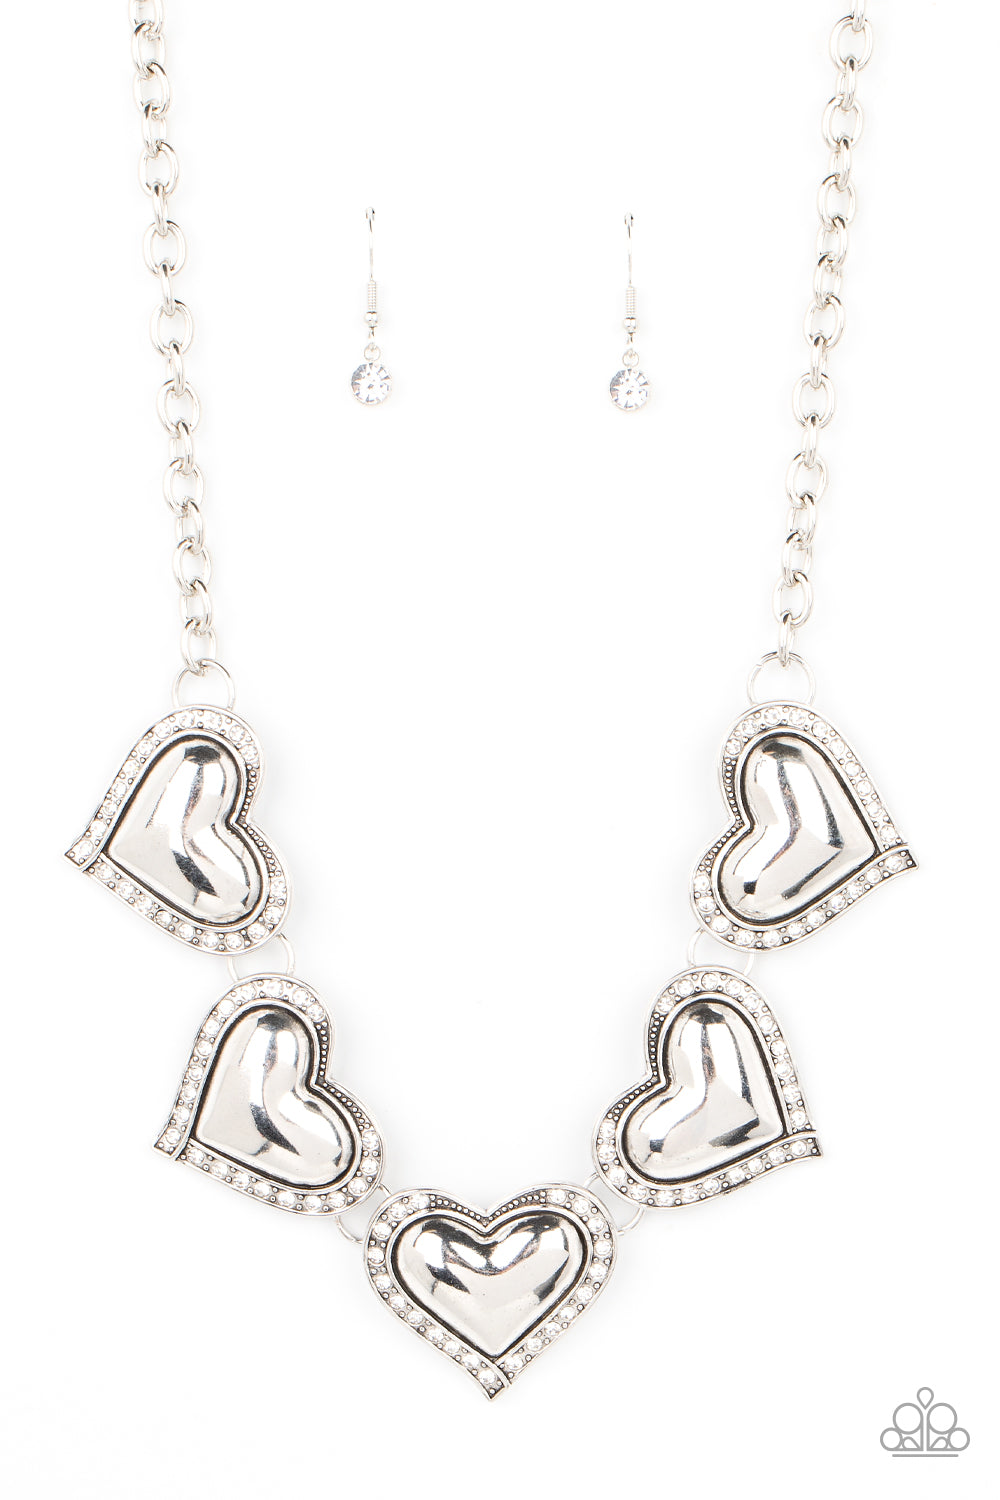 Paparazzi Kindred Hearts - White Heart Necklace - A Finishing Touch Jewelry